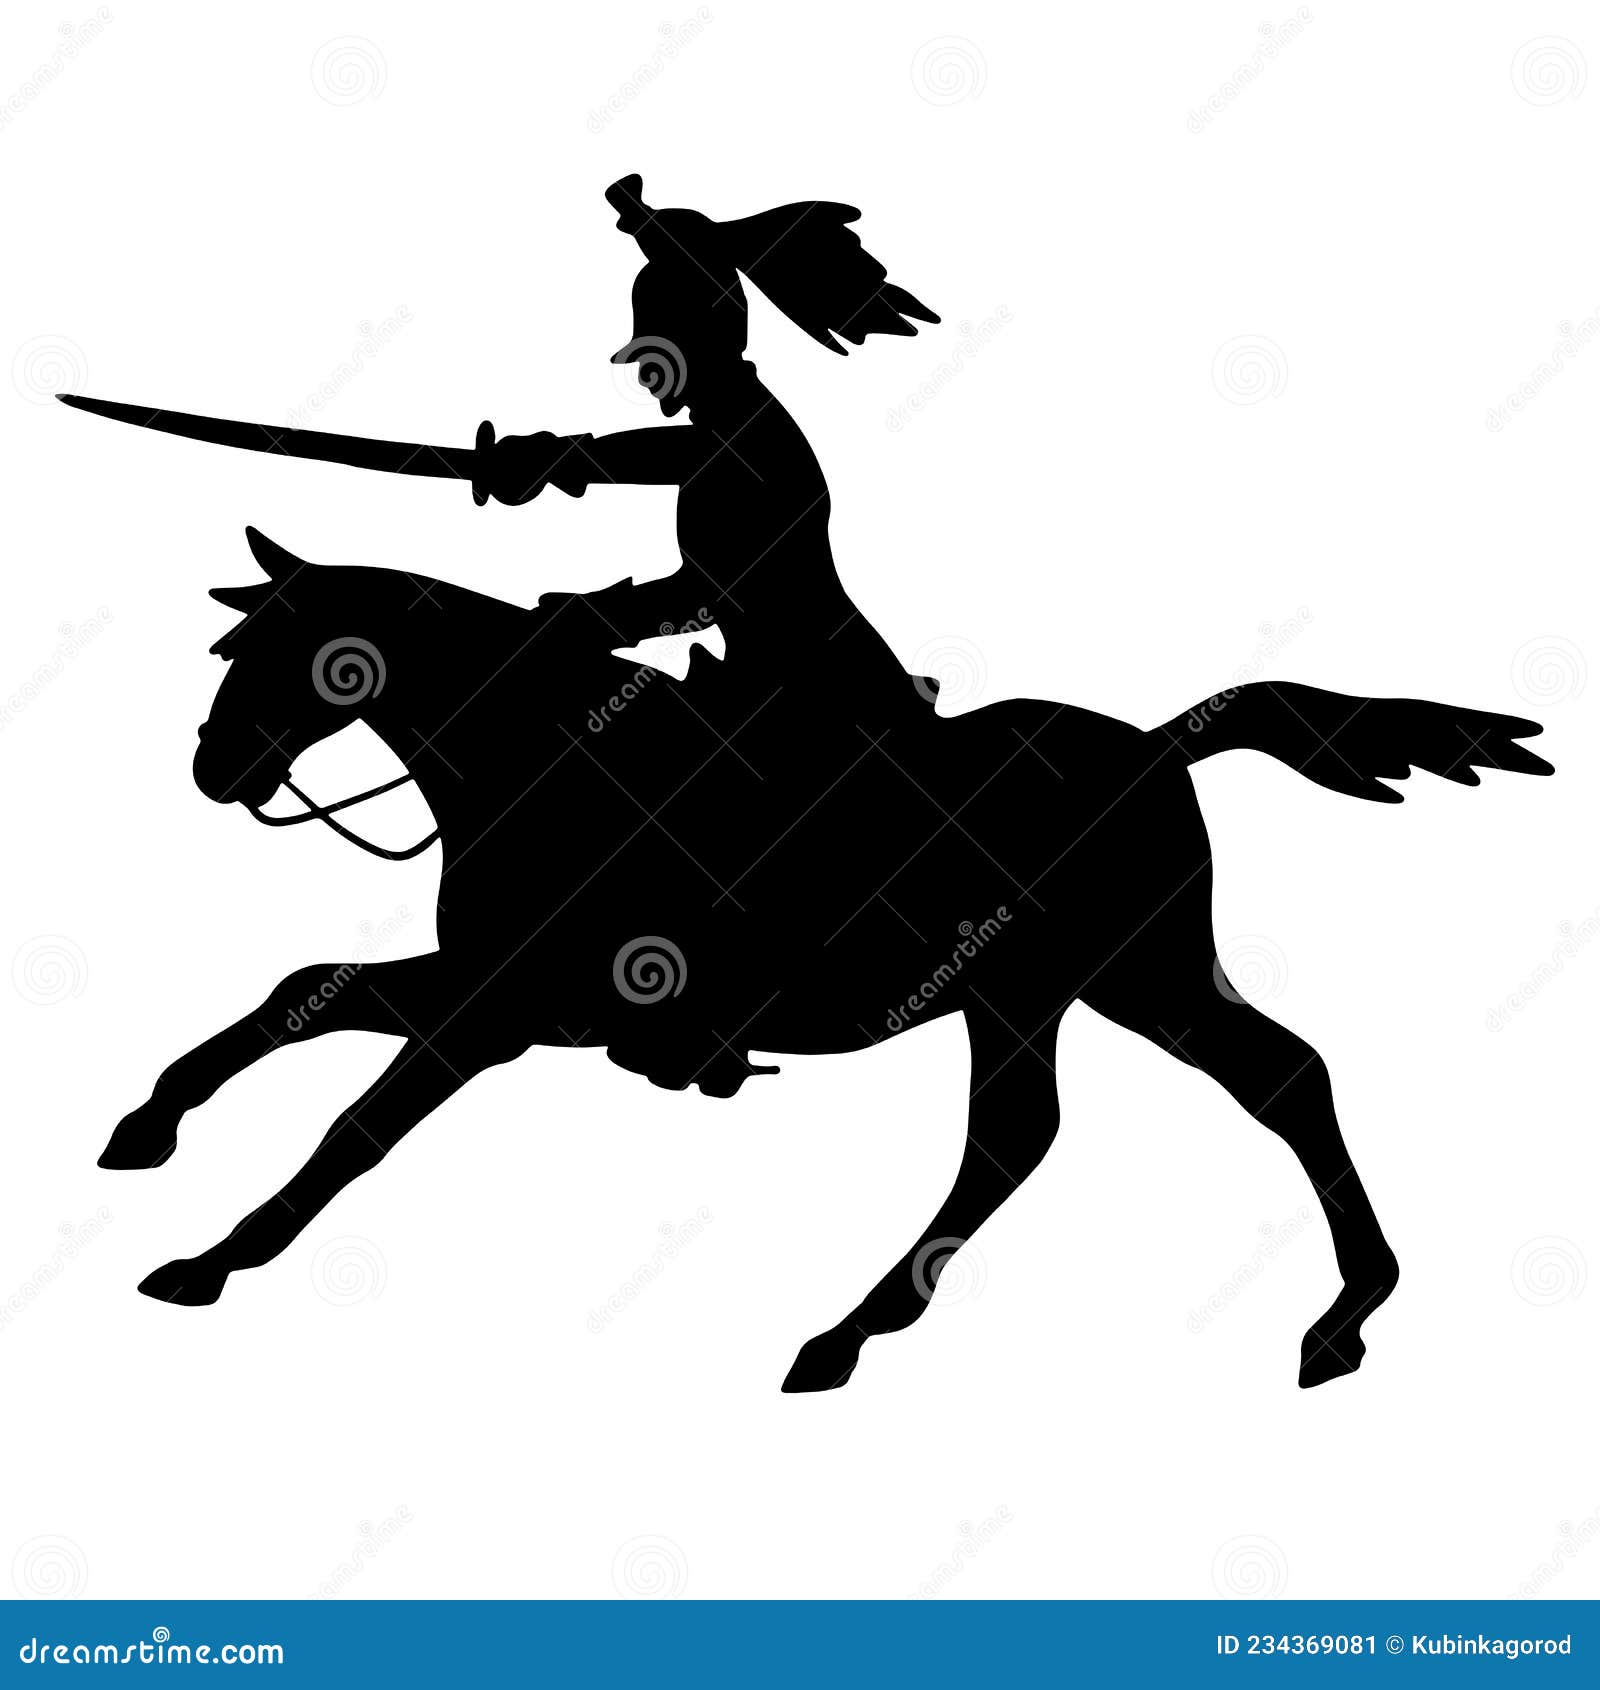 silhouette of a horseman with a saber. the military cavalry is attacking